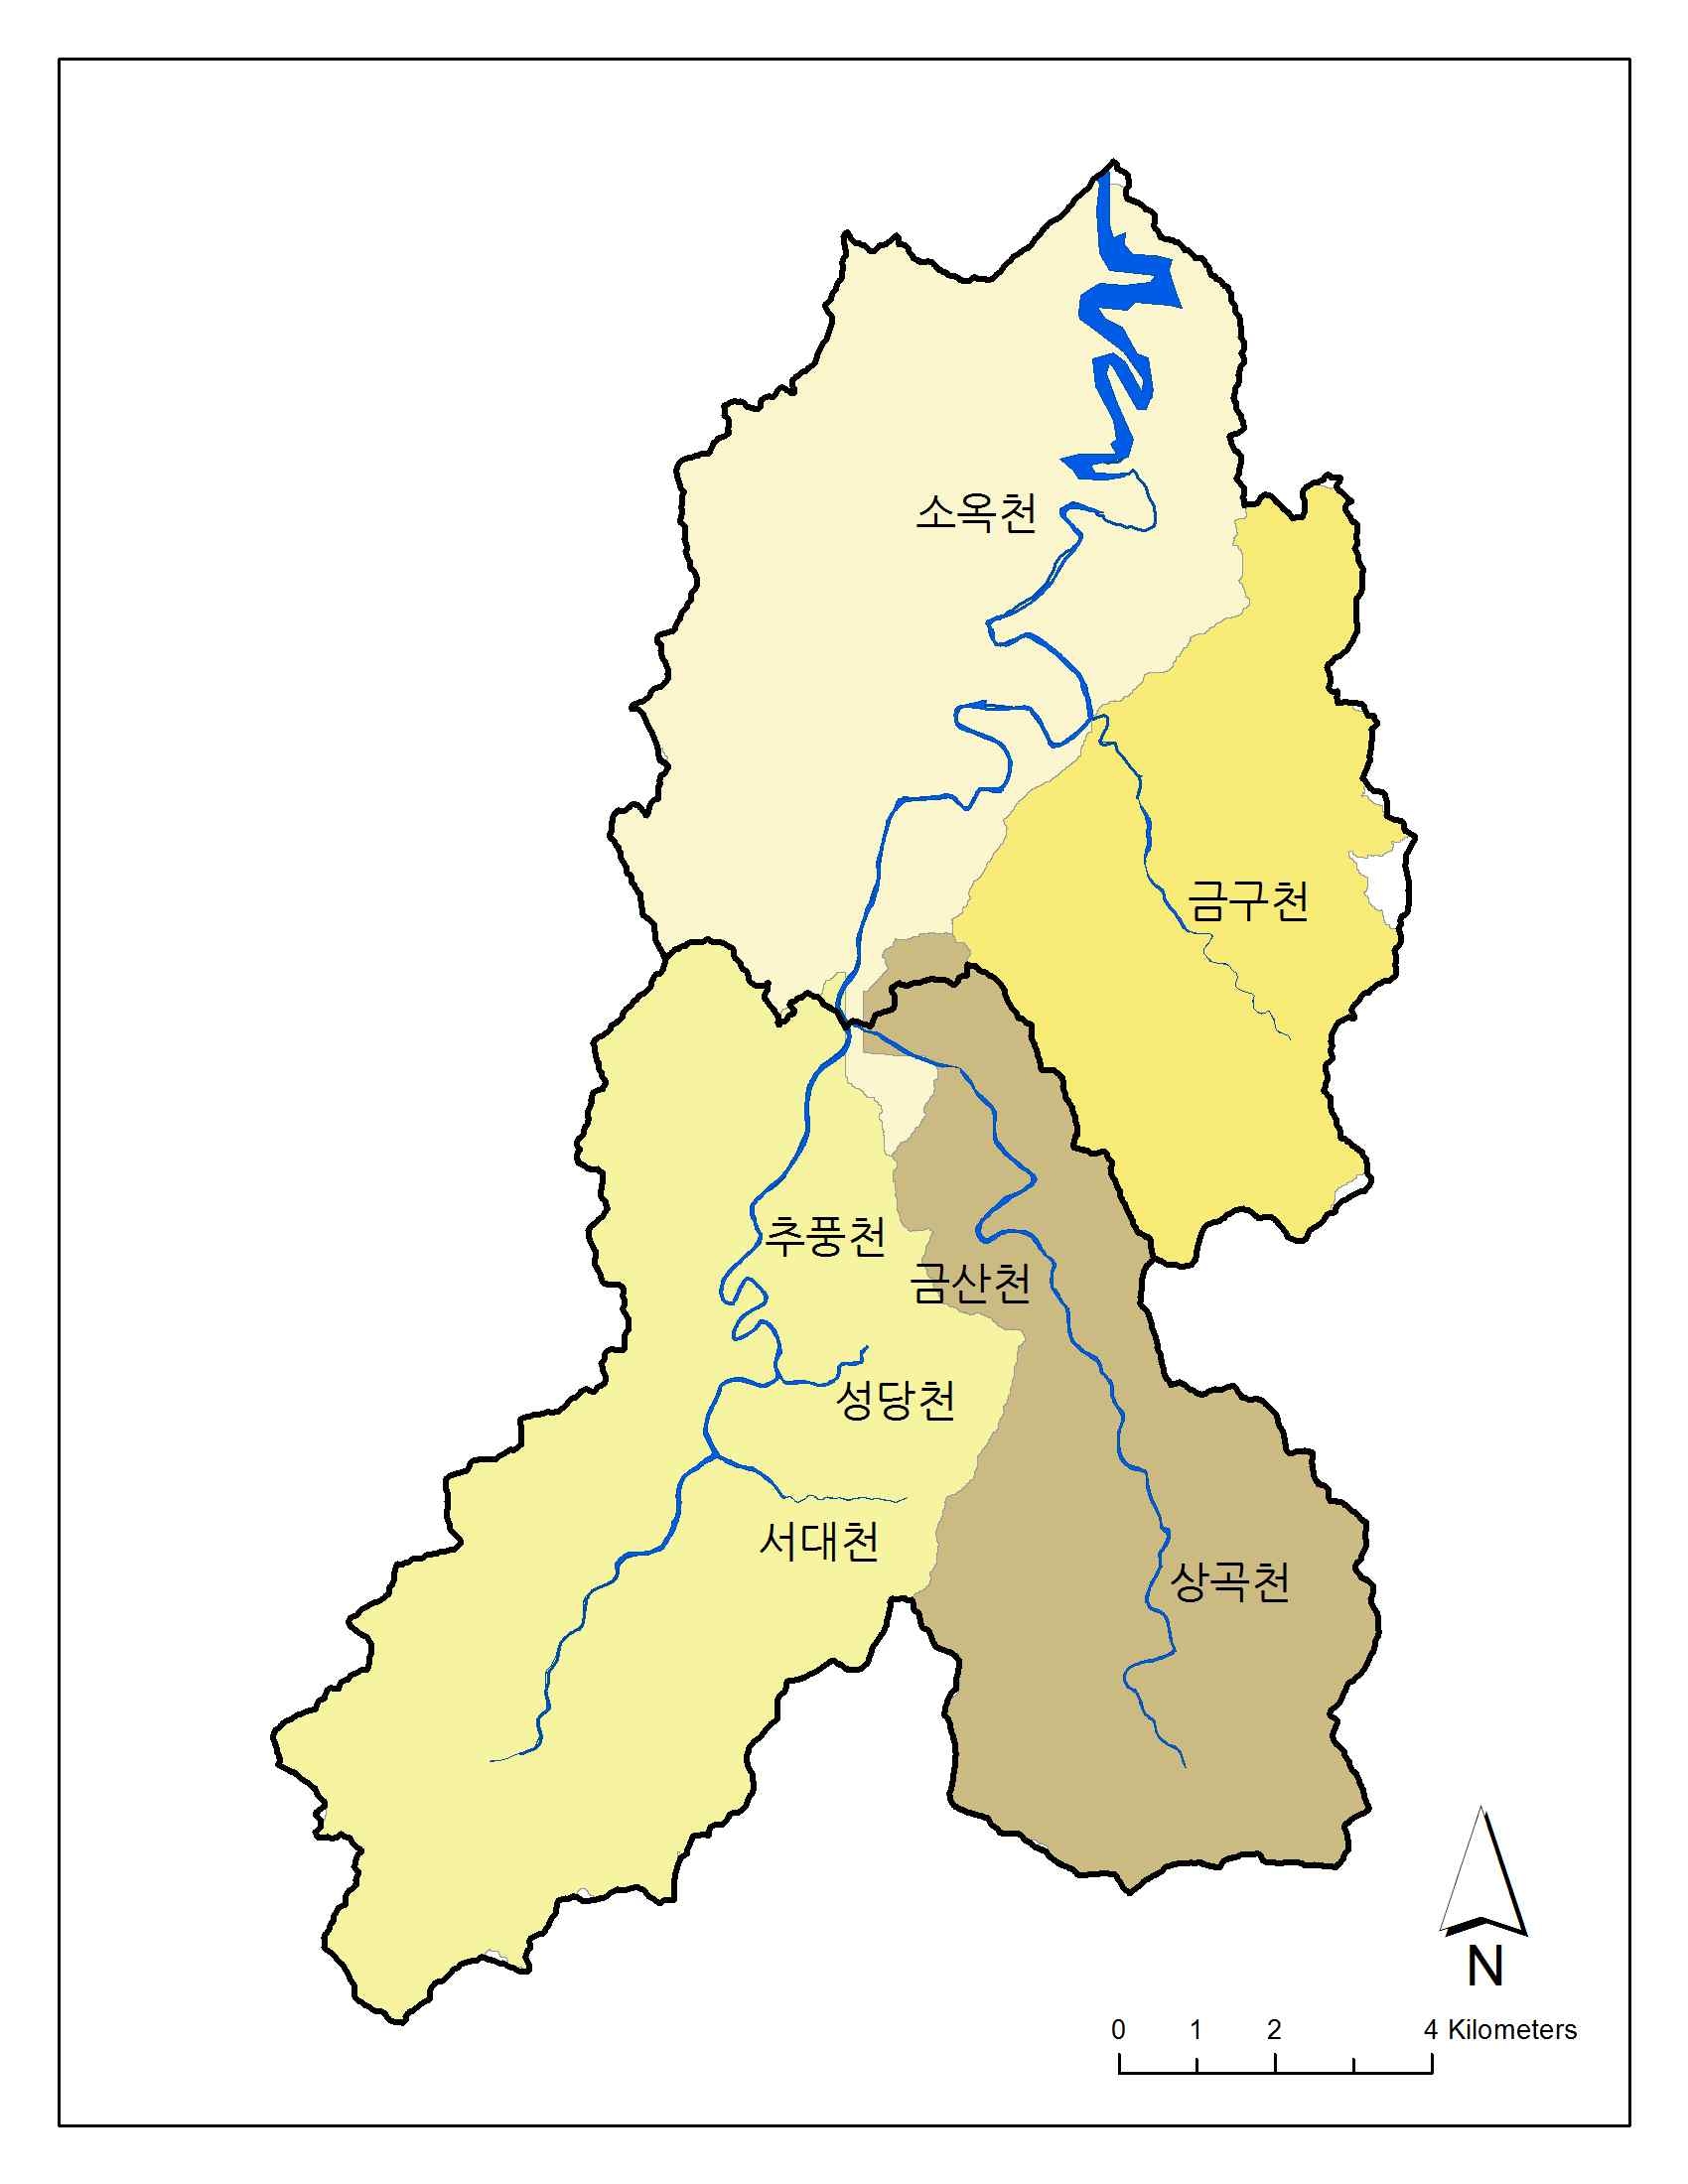 Detail of So-okcheon watershed